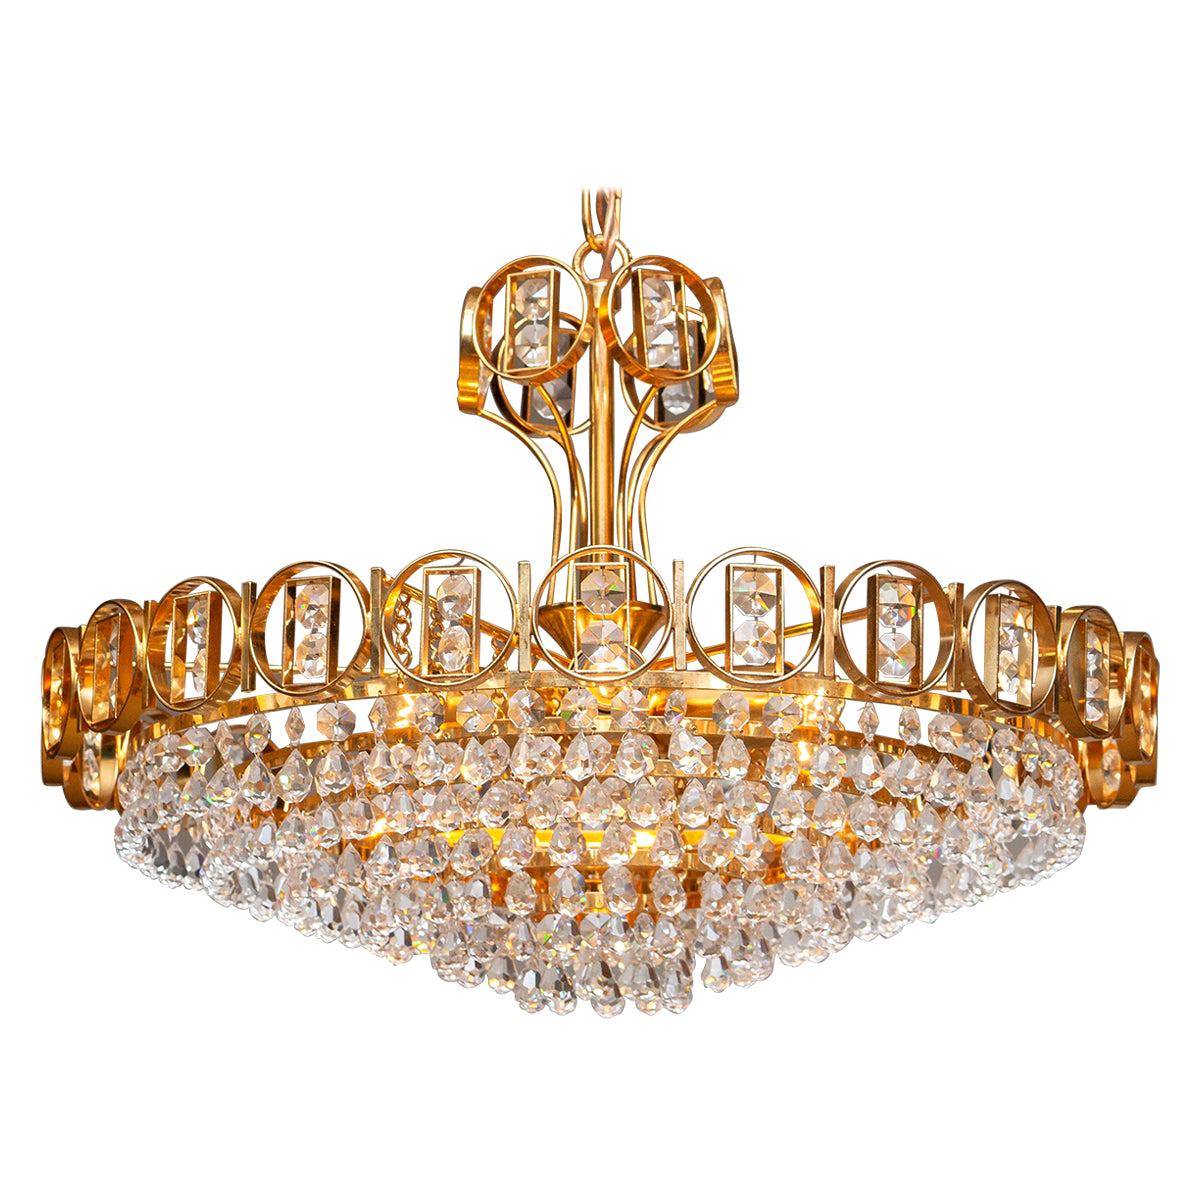 Mid-Century Modern 1970s, Gold Plated Brass Chandelier with Faceted Crystals Made by Palwa Germany